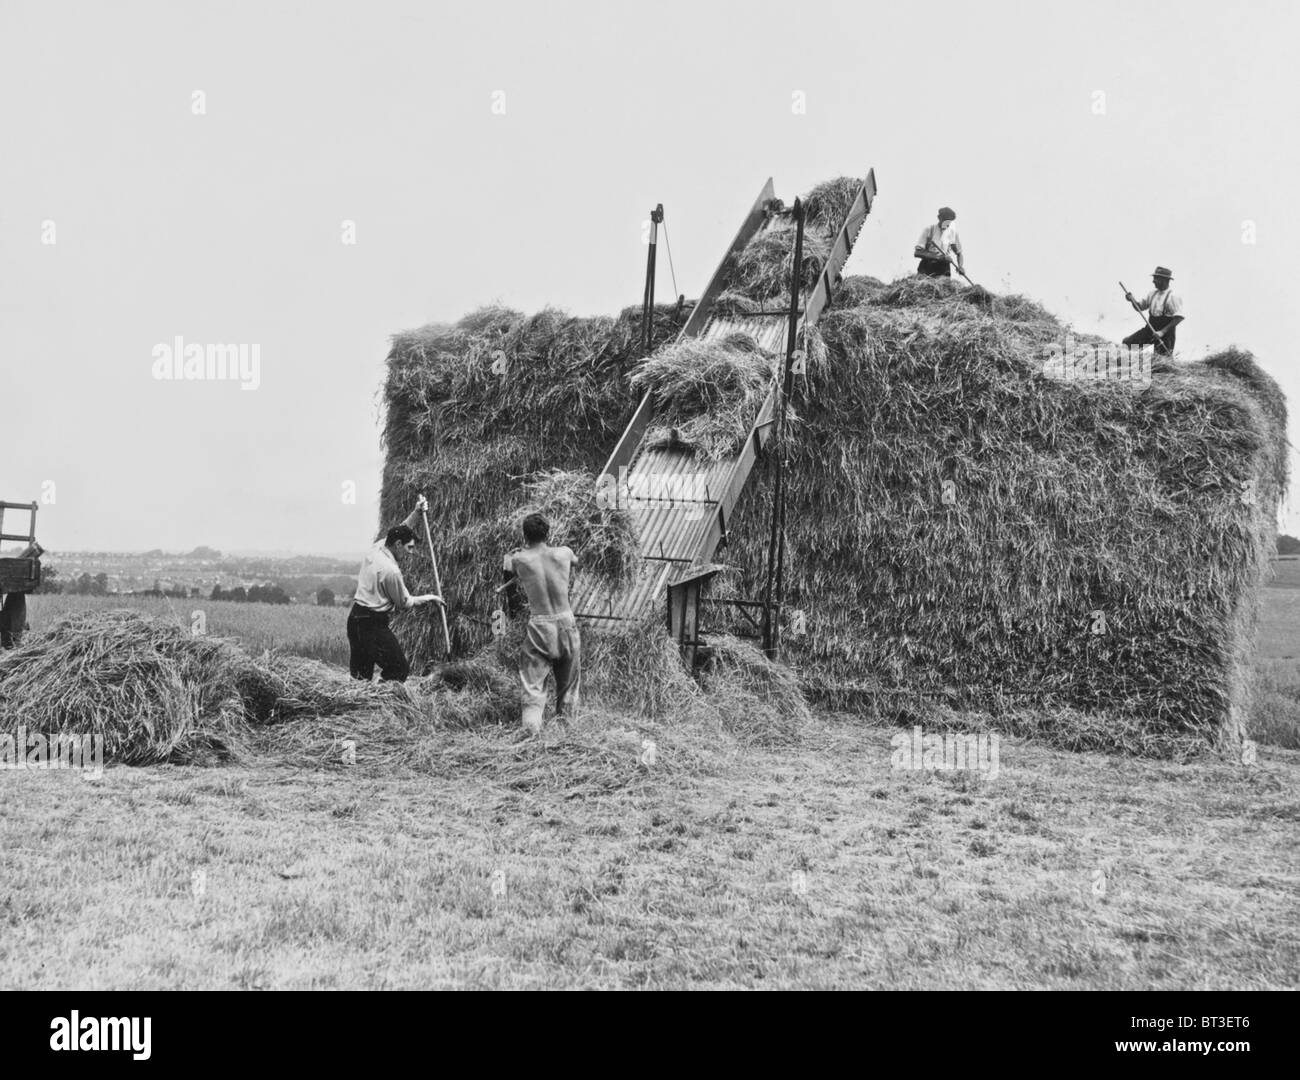 Vintage farming images from 1930's a binder working in the fields and later the making of a haystack Stock Photo